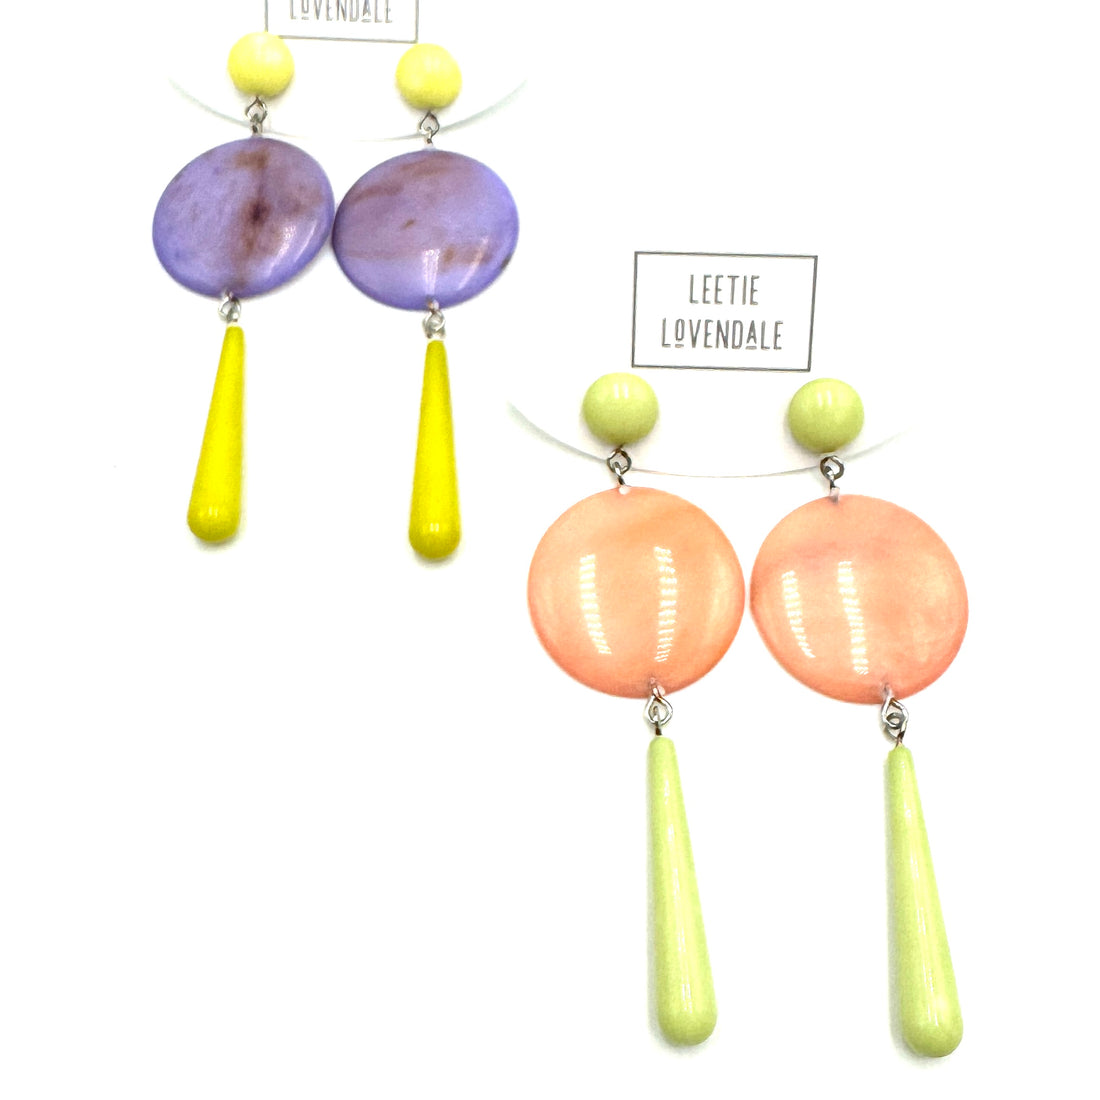 colorful statement earrings